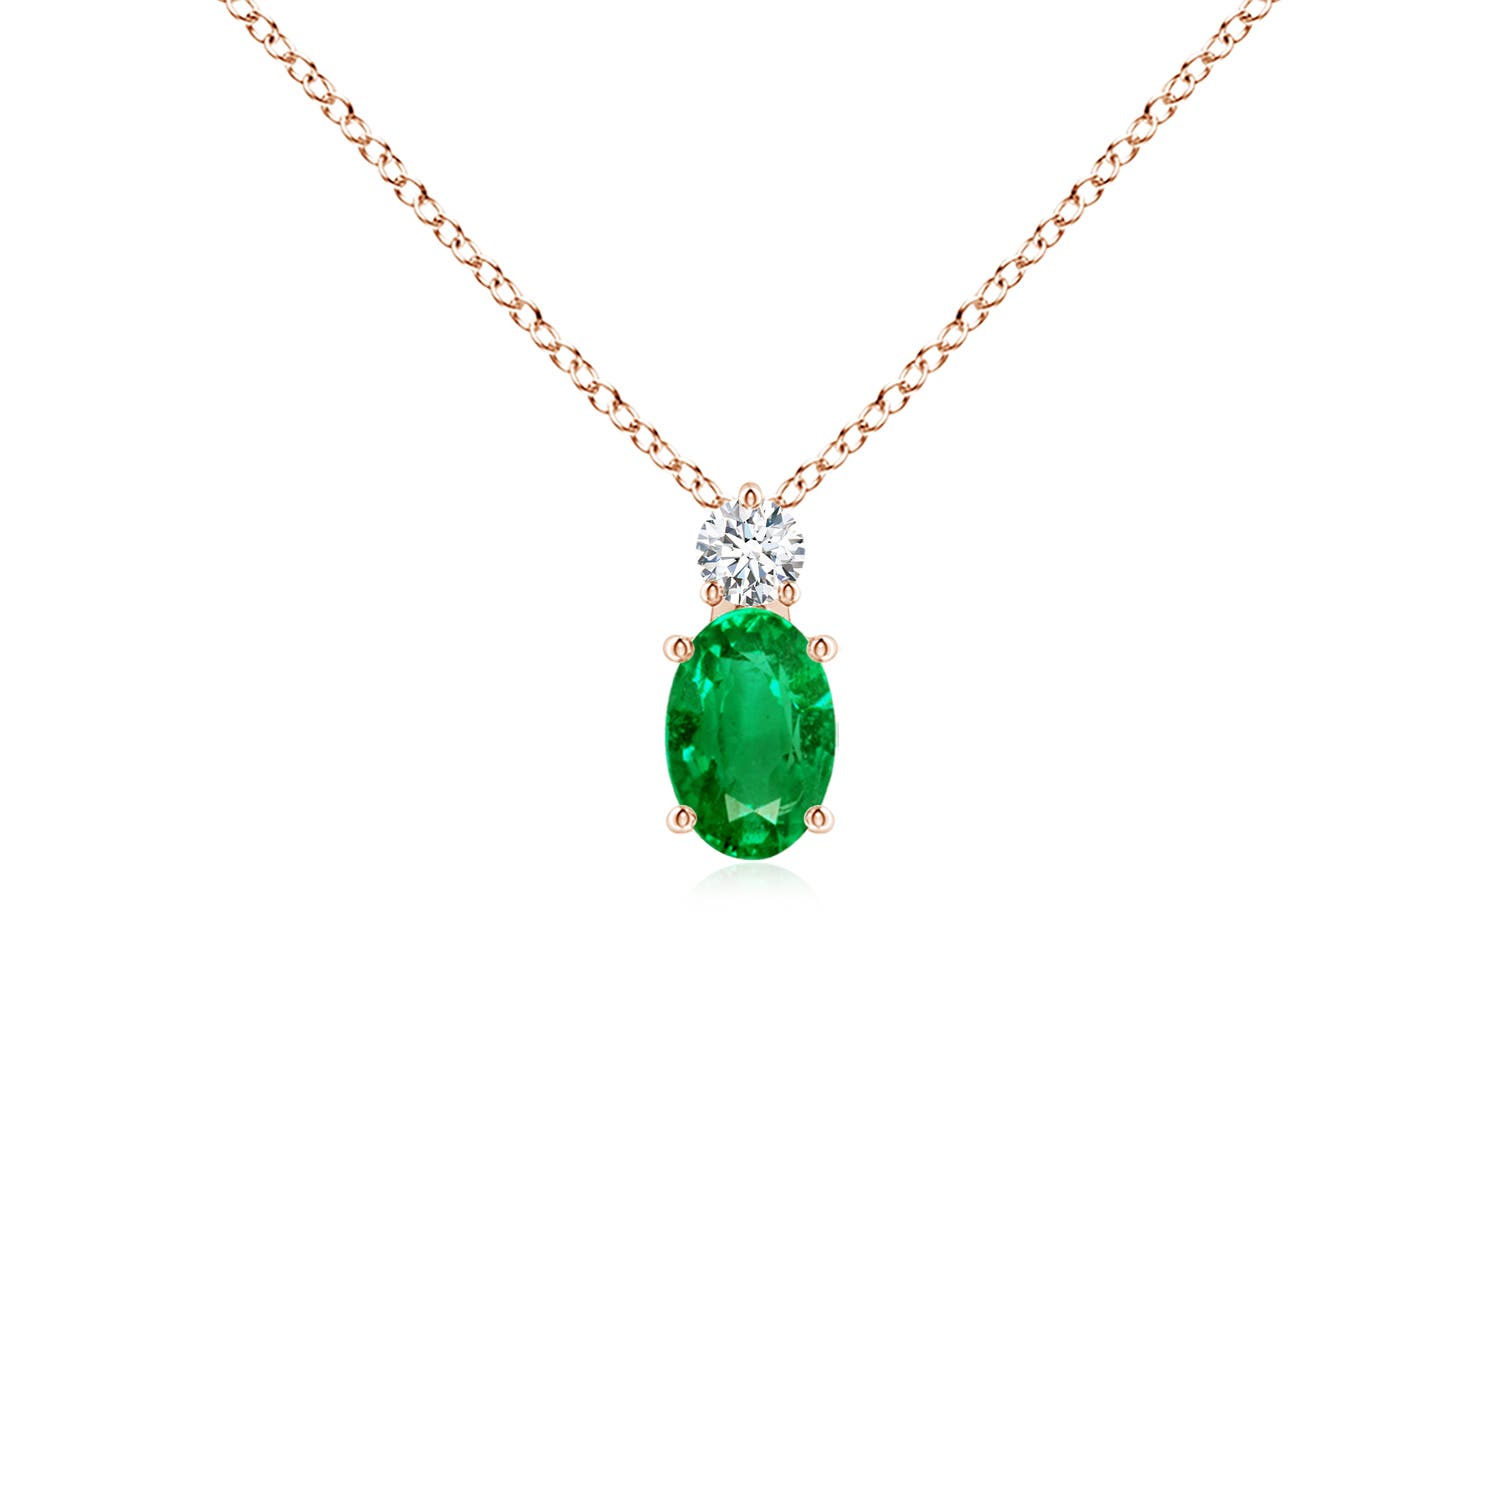 Shop Emerald Pendant Necklaces for Her in Canada | Angara